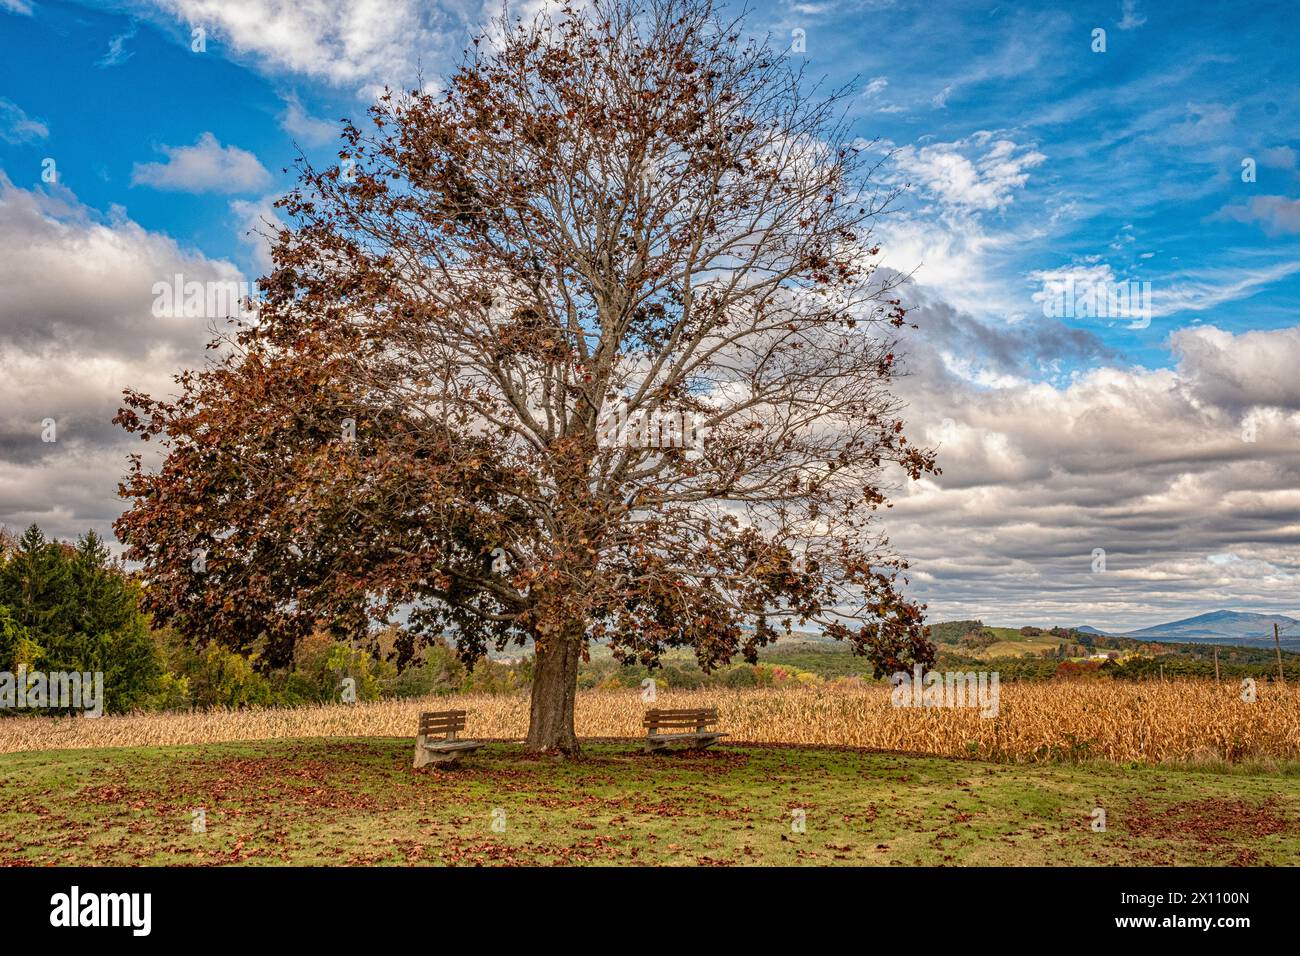 A crimson king maple tree stands alone in a field Stock Photo